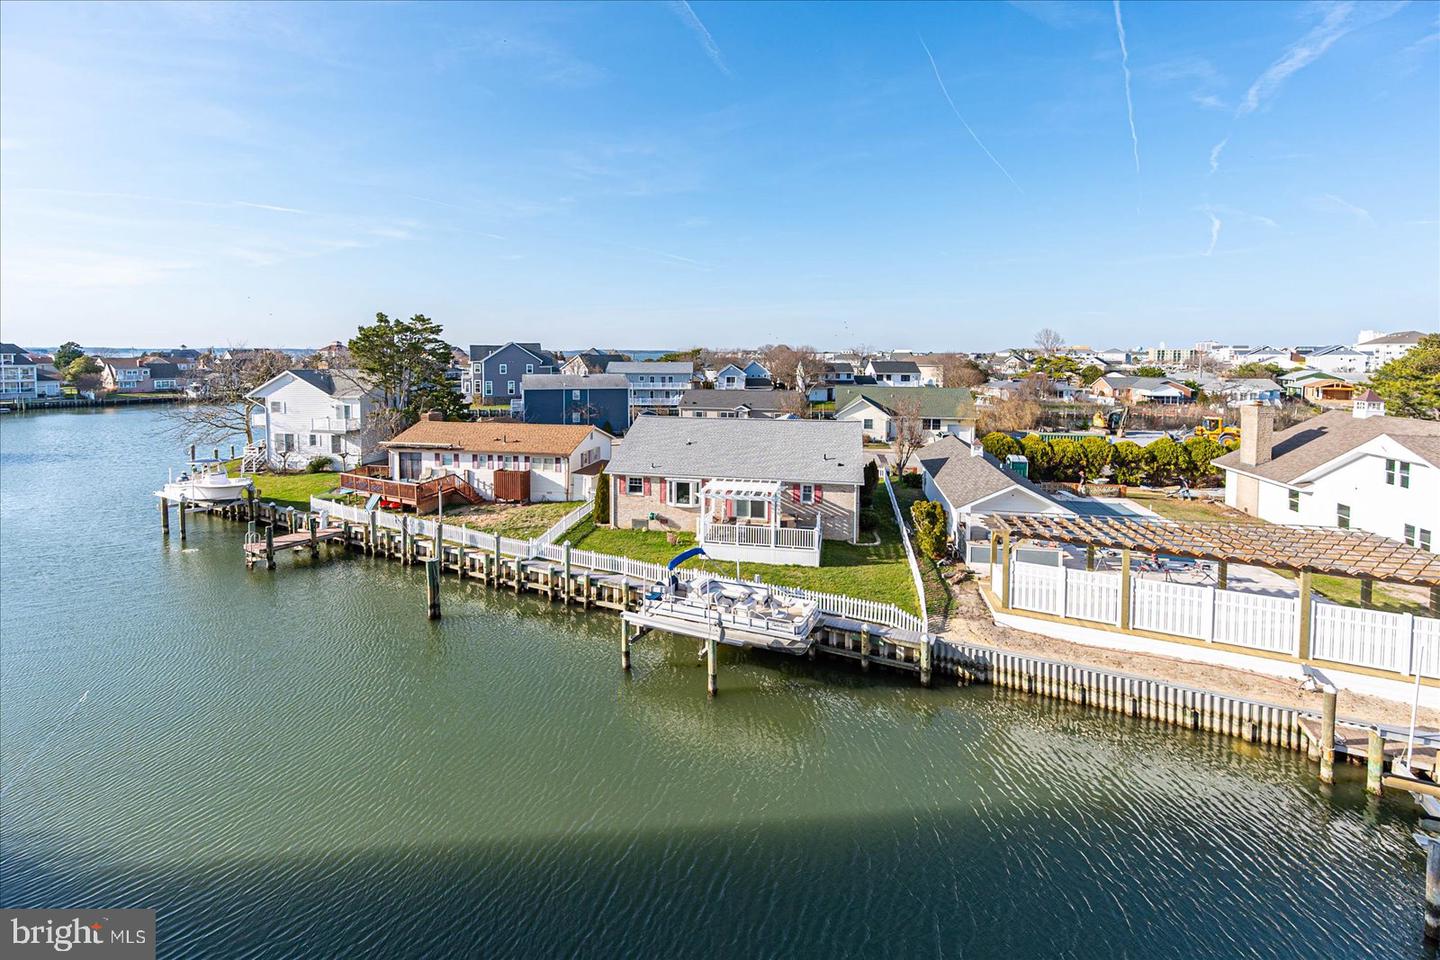 MDWO2019672-802922310414-2024-03-15-14-18-06 300 17th St #303 | Ocean City, MD Real Estate For Sale | MLS# Mdwo2019672  - 1st Choice Properties